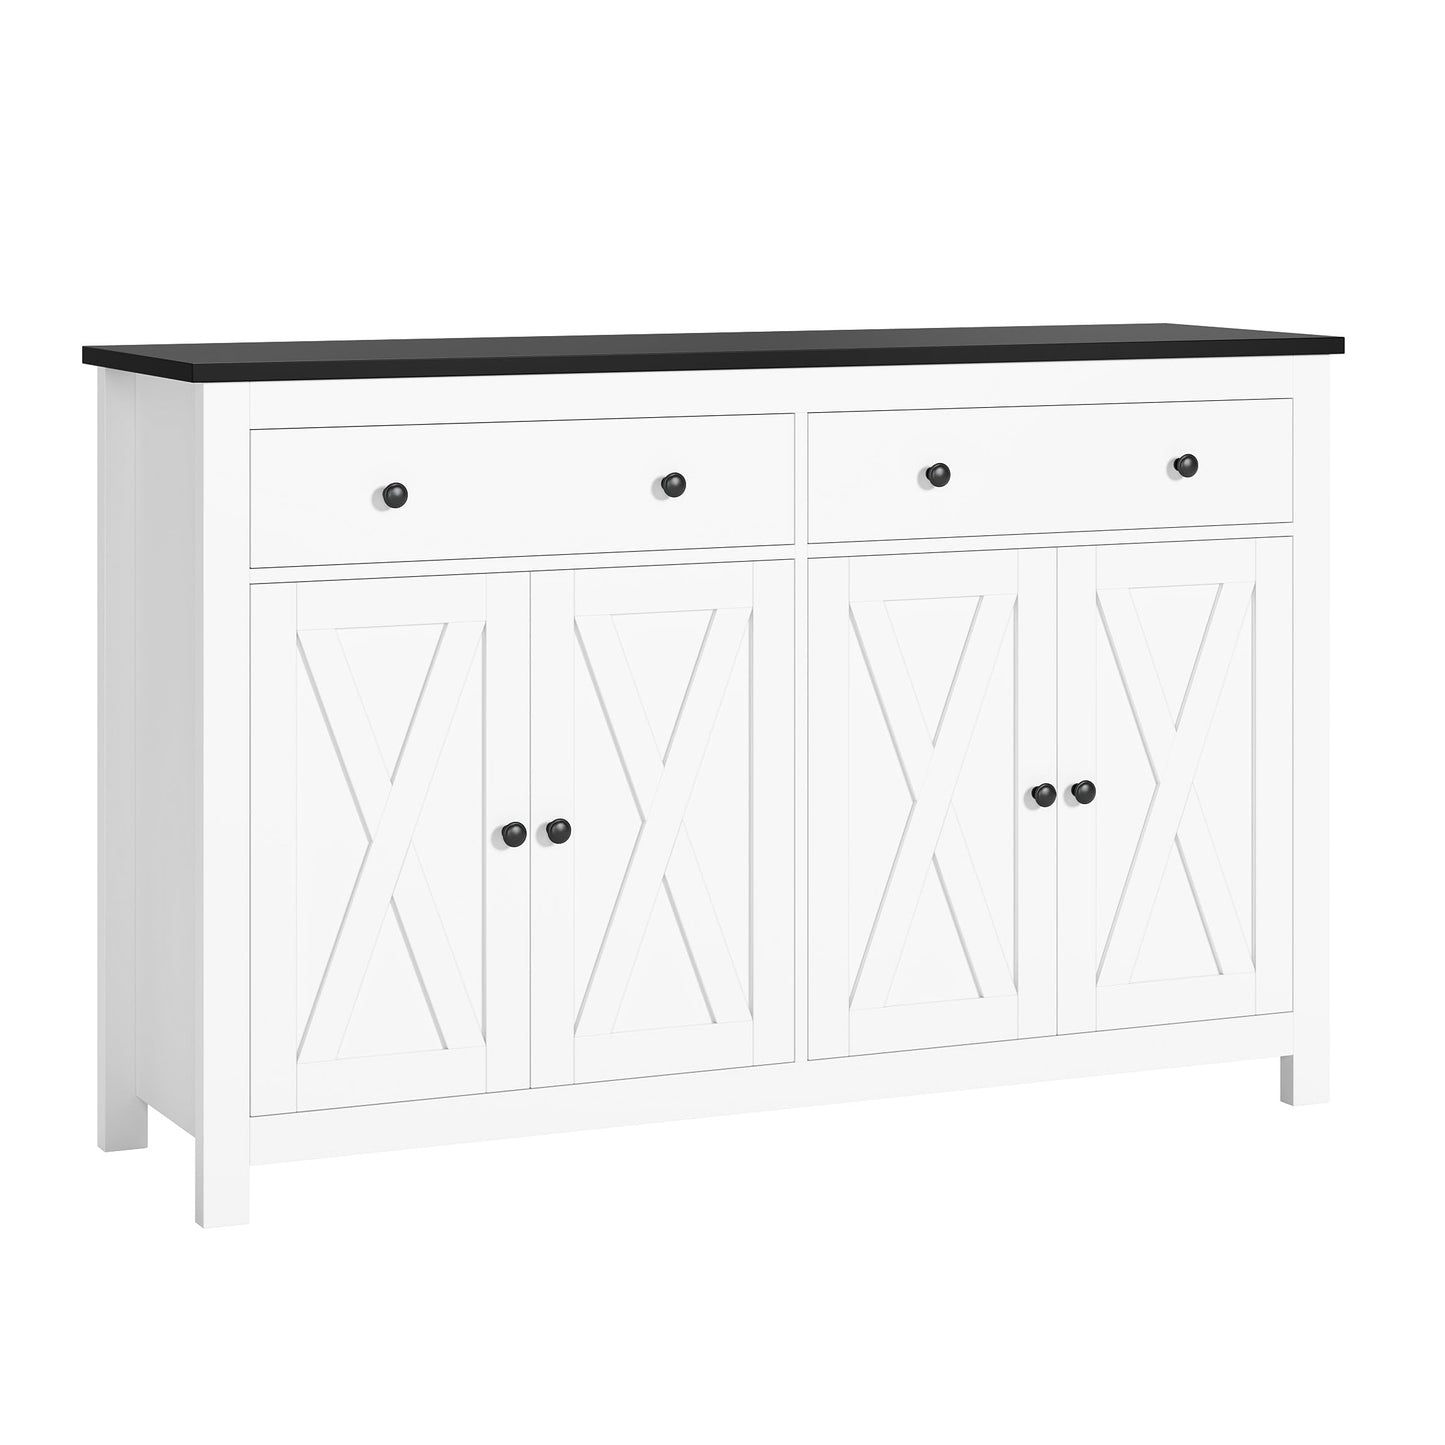 FOTOSOK Sideboard Buffet Cabinet with Storage, 55" Large Kitchen Storage Cabinet with 2 Drawers and 4 Doors, Wood Coffee Bar Cabinet Buffet Table for